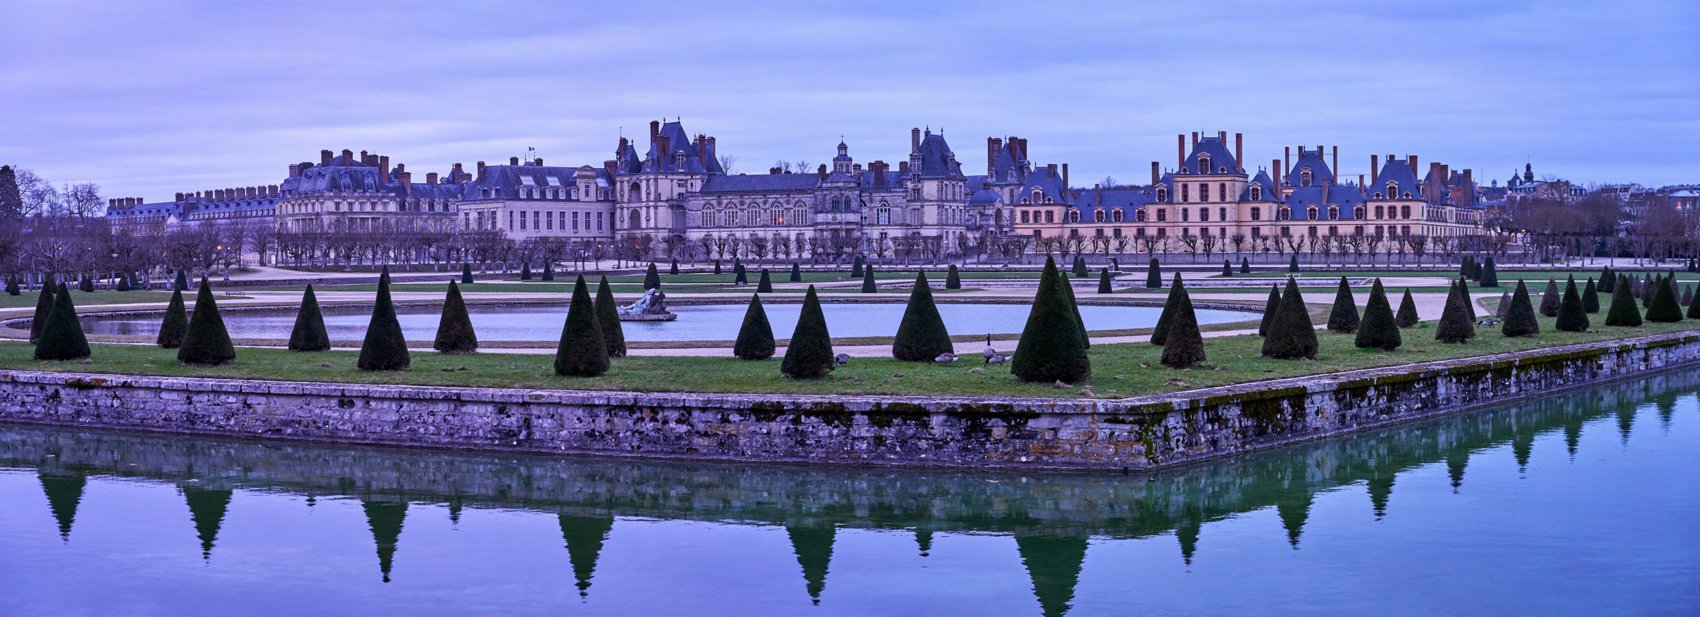 Hero Image for Fontainebleau (Chateau, Park, Sunset, & Canal) Feb 2020